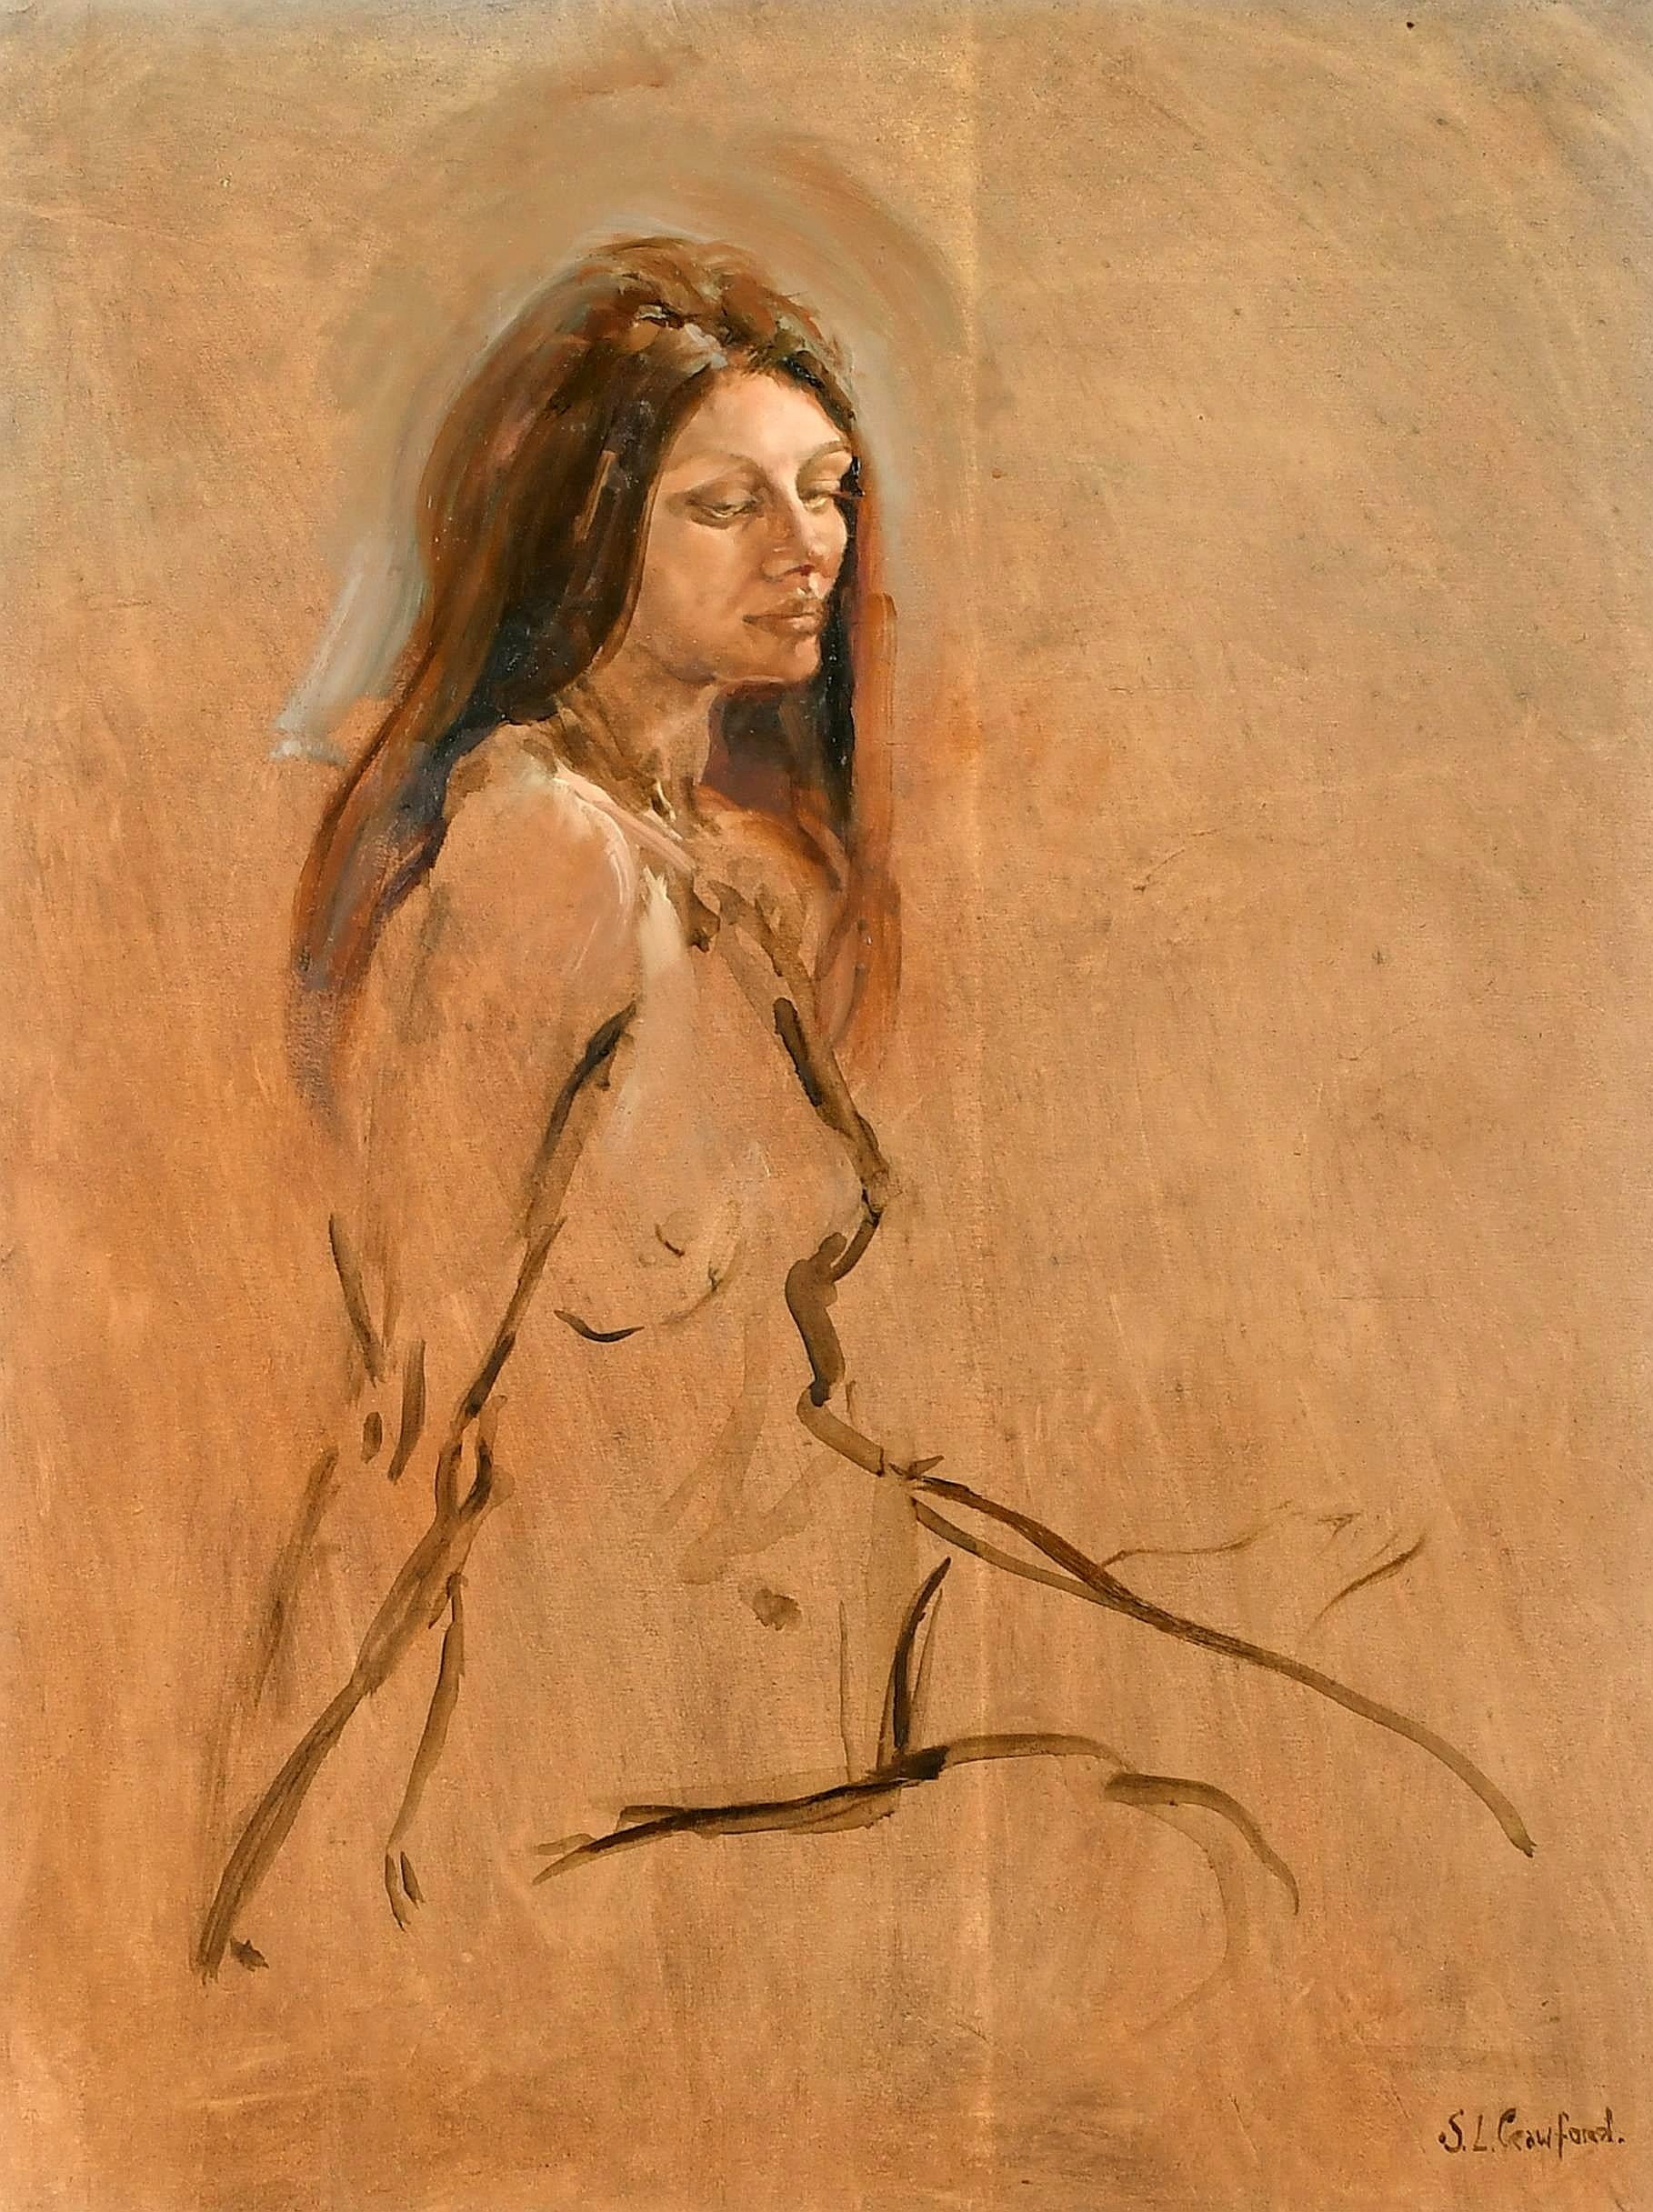 A beautiful c.1970 oil on panel nude portrait of a nude lady by Susan Crawford, an artist who has painted the Queen and many other Royals. Excellent quality and condition portrait of the lady with sketched body and highly detailed face. 

The work